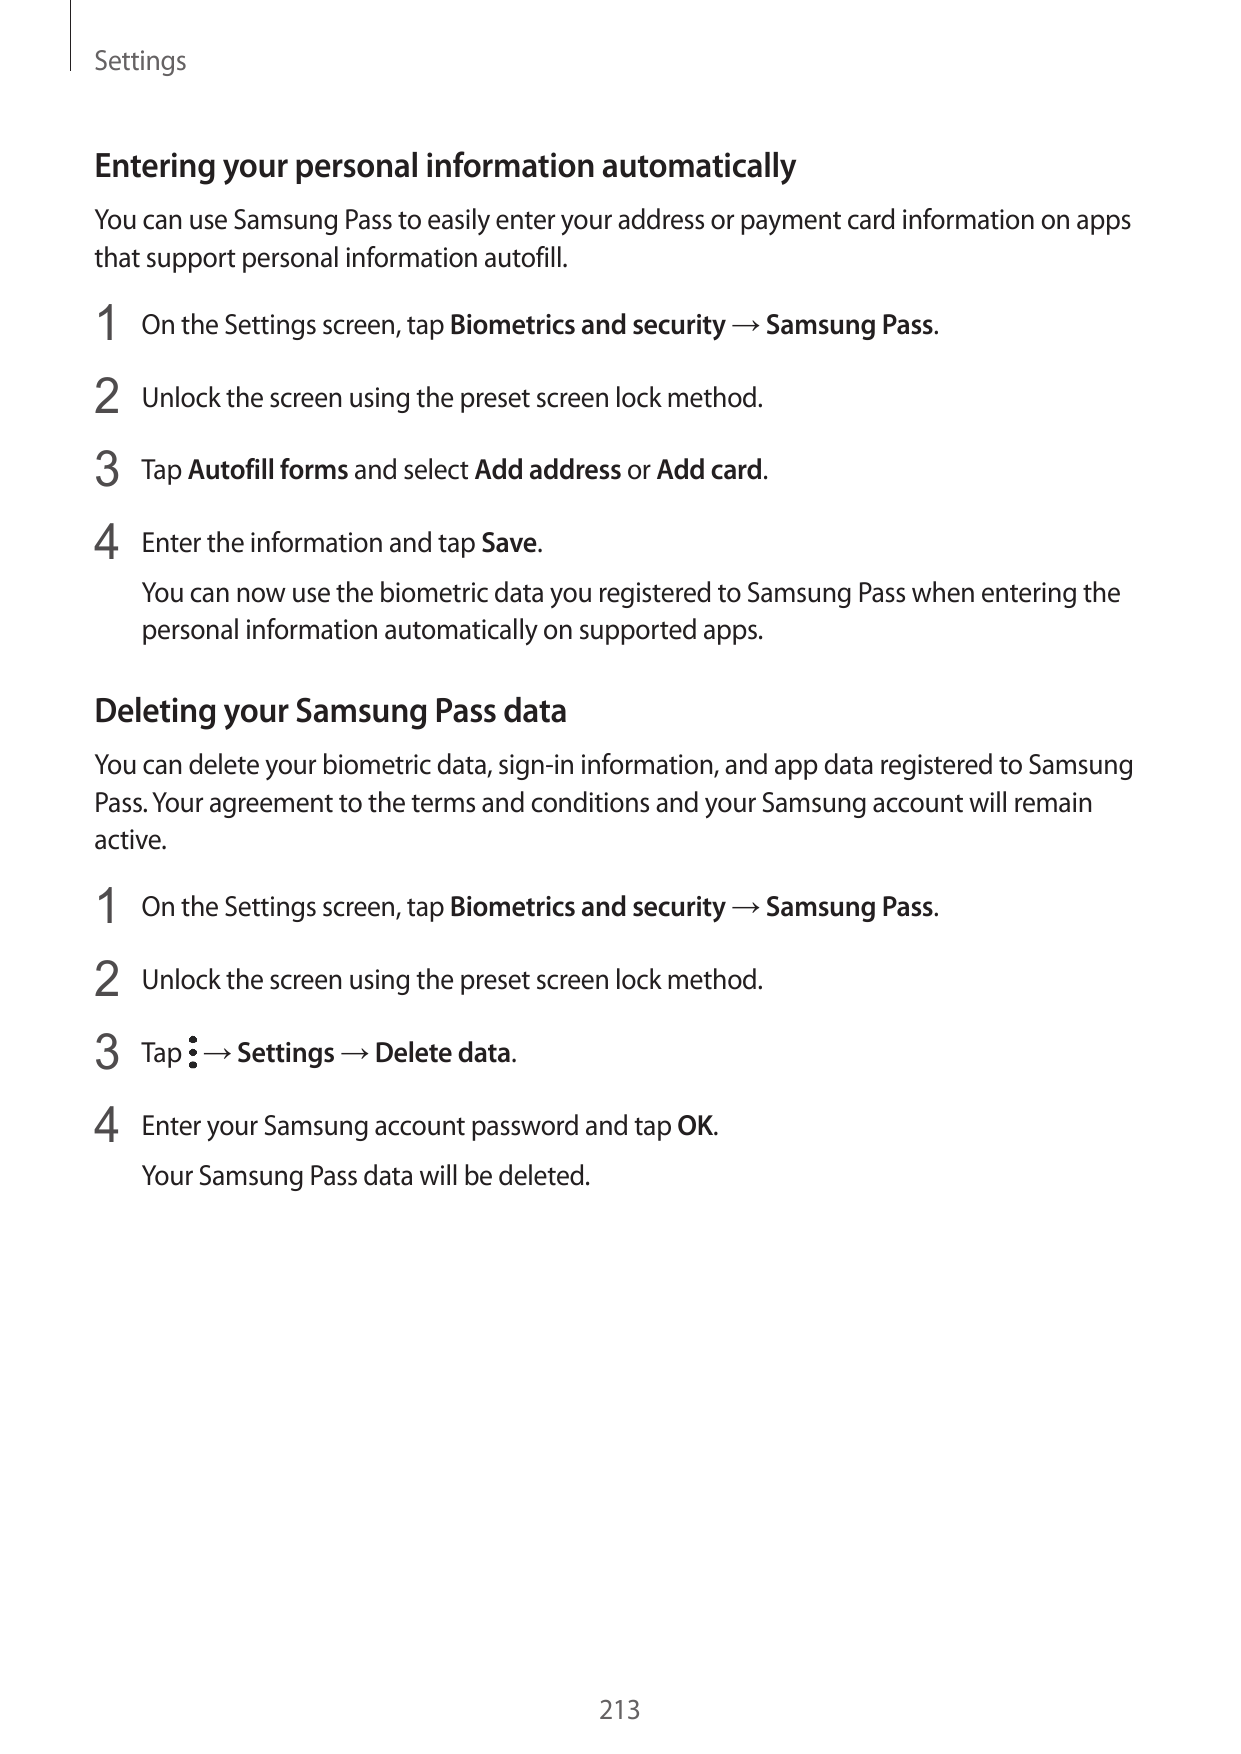 SettingsEntering your personal information automaticallyYou can use Samsung Pass to easily enter your address or payment card in